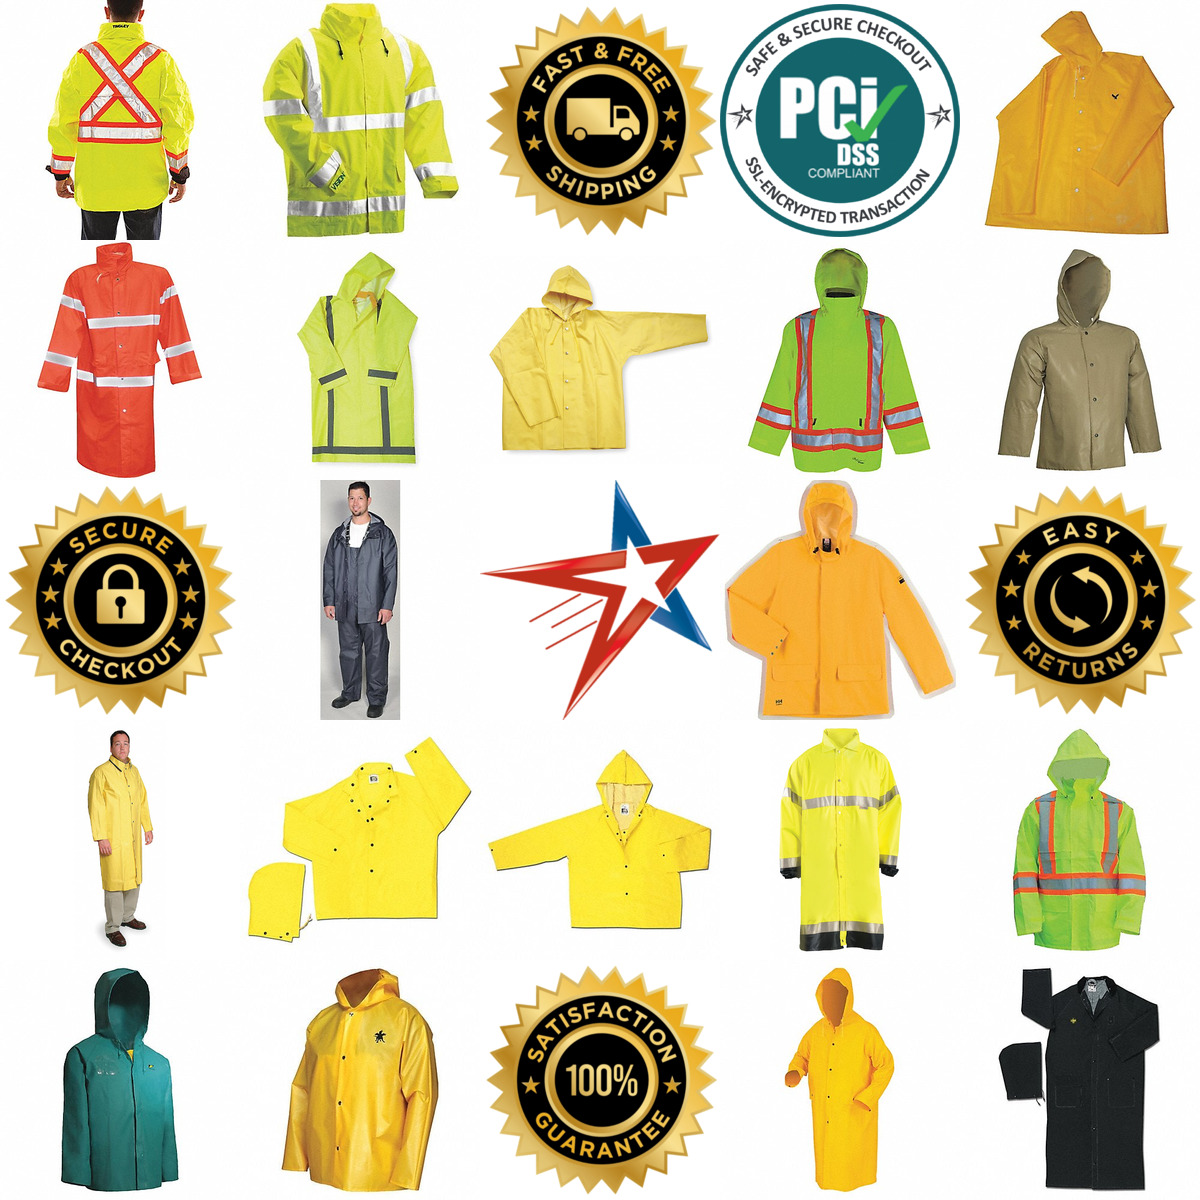 A selection of Rain Jackets and Coats products on GoVets